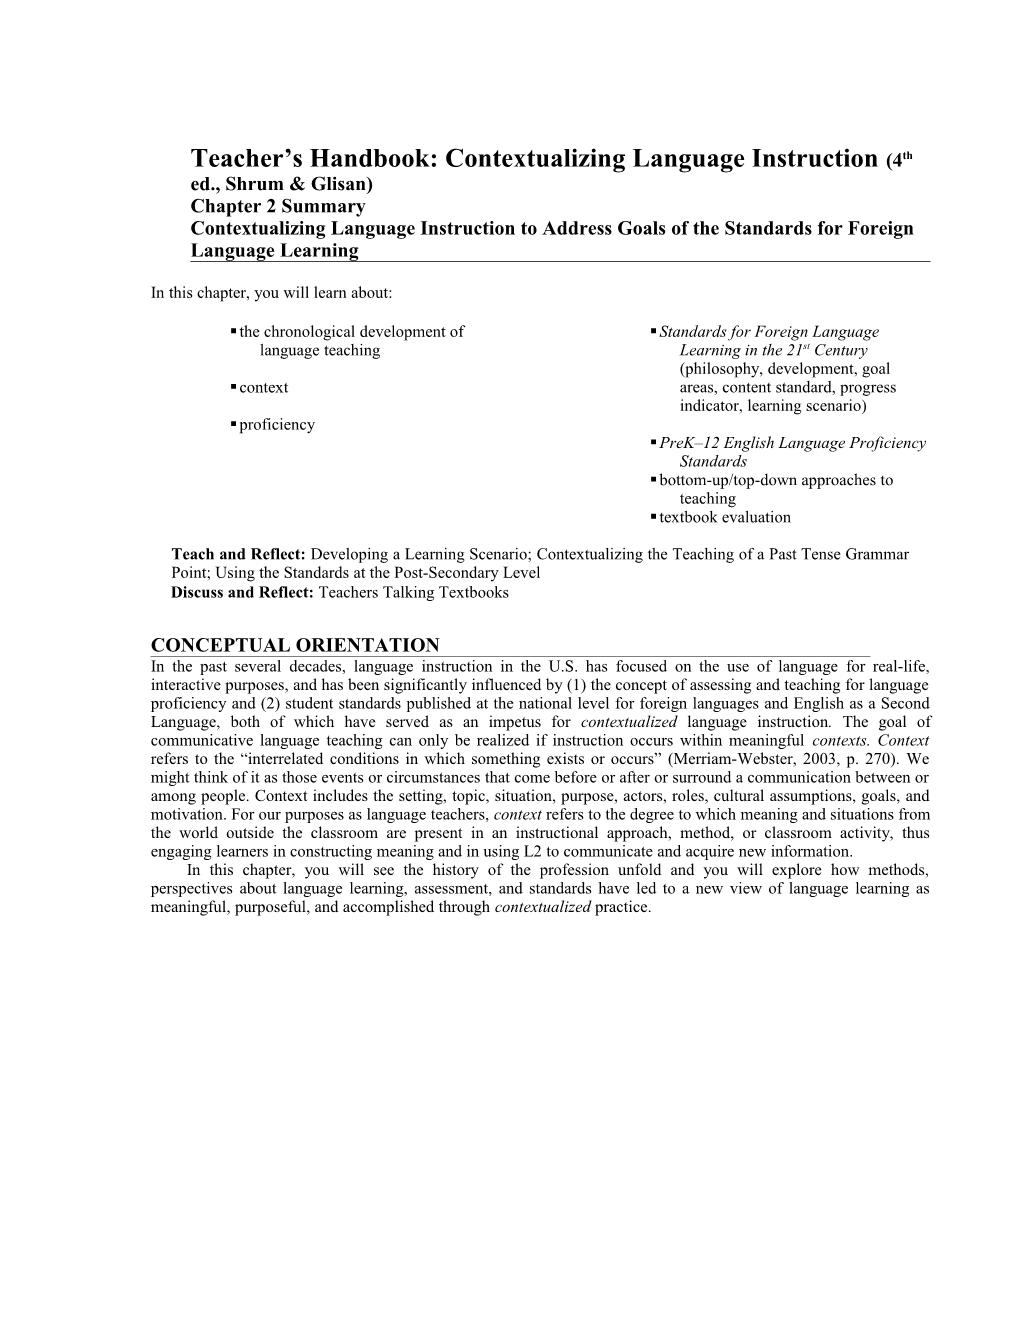 Contextualizing Language Instruction To Address Goals Of The Standards For Foreign Language Learning